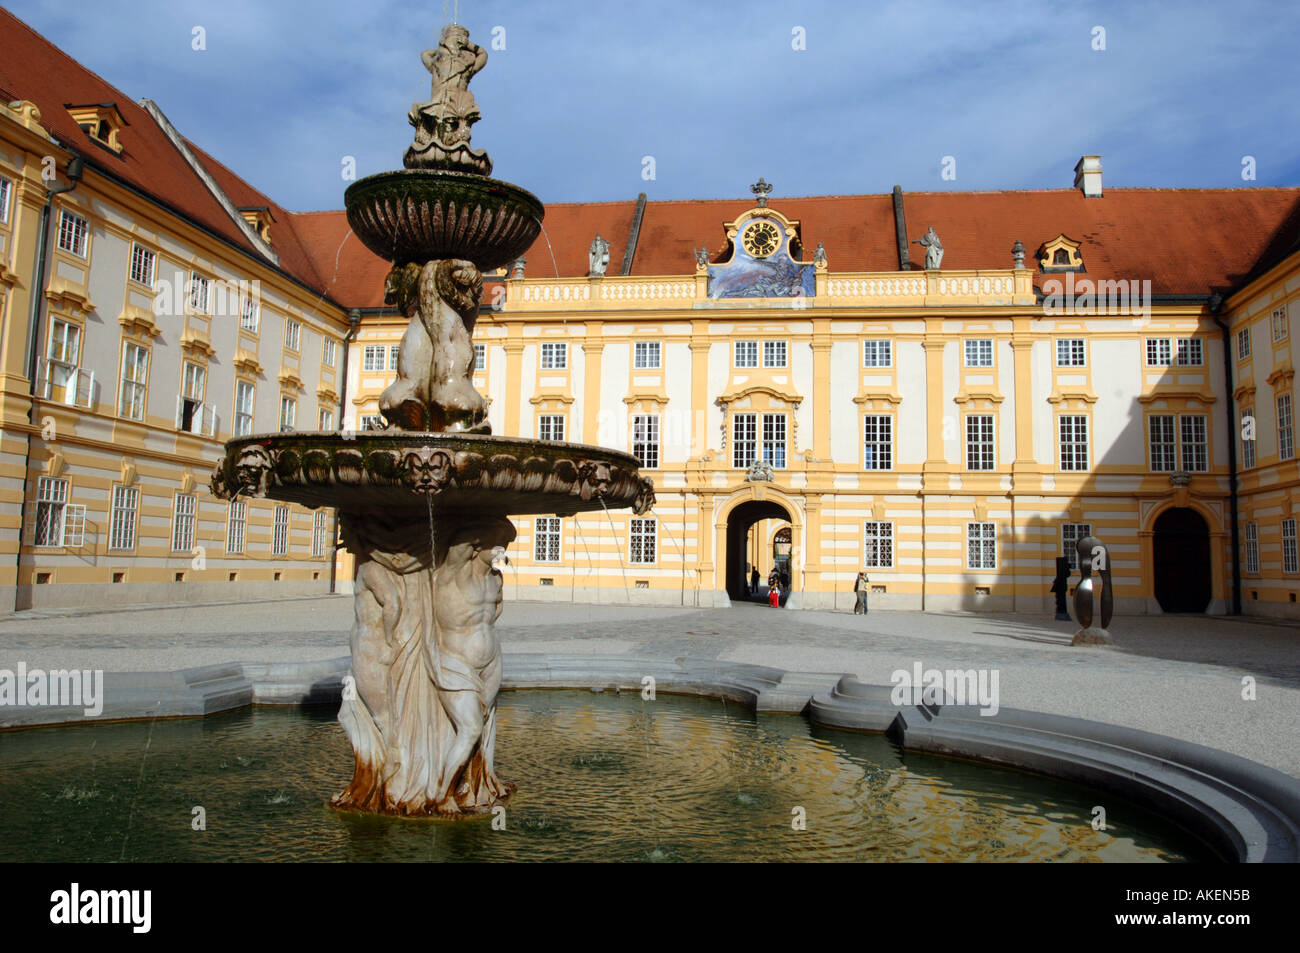 The Monastery at Melk Nr Vienna on the bank of the River Danube Stock Photo